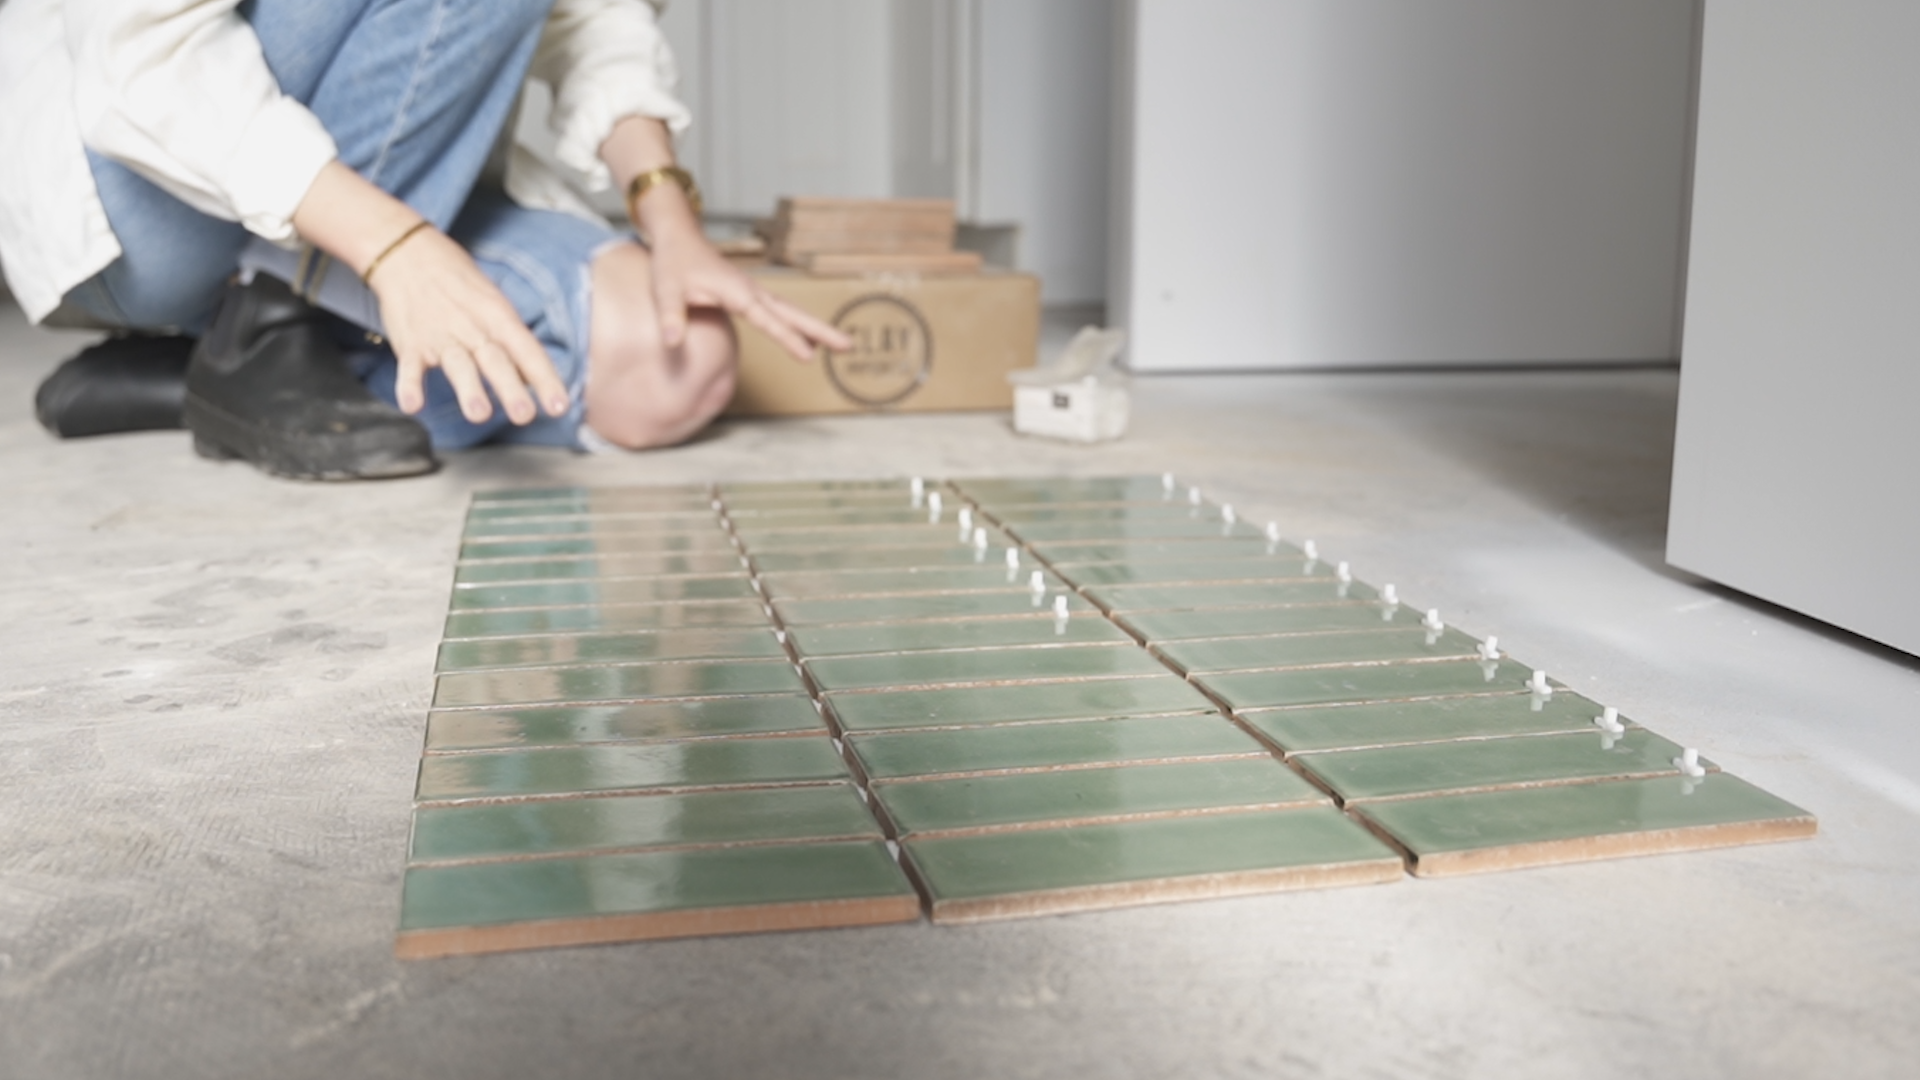 Preparing the tile layout with spacers